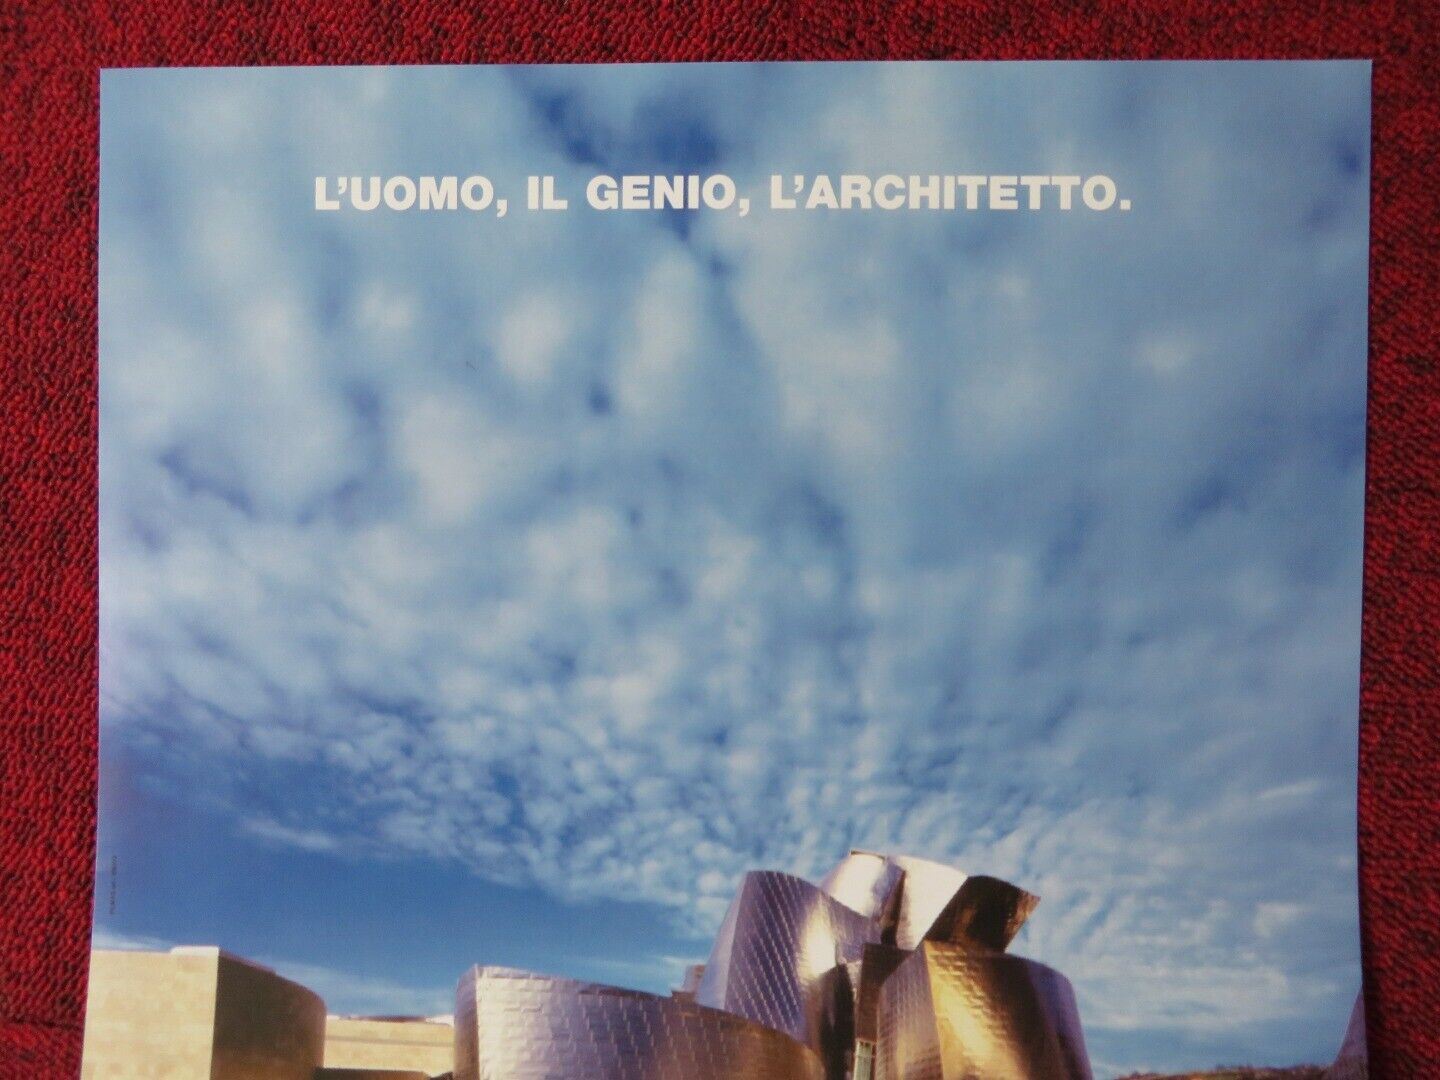 SKETCHES OF FRANK GEHRY ITALIAN LOCANDINA (27"x12.5") POSTER SYDNEY POLLACK 2006